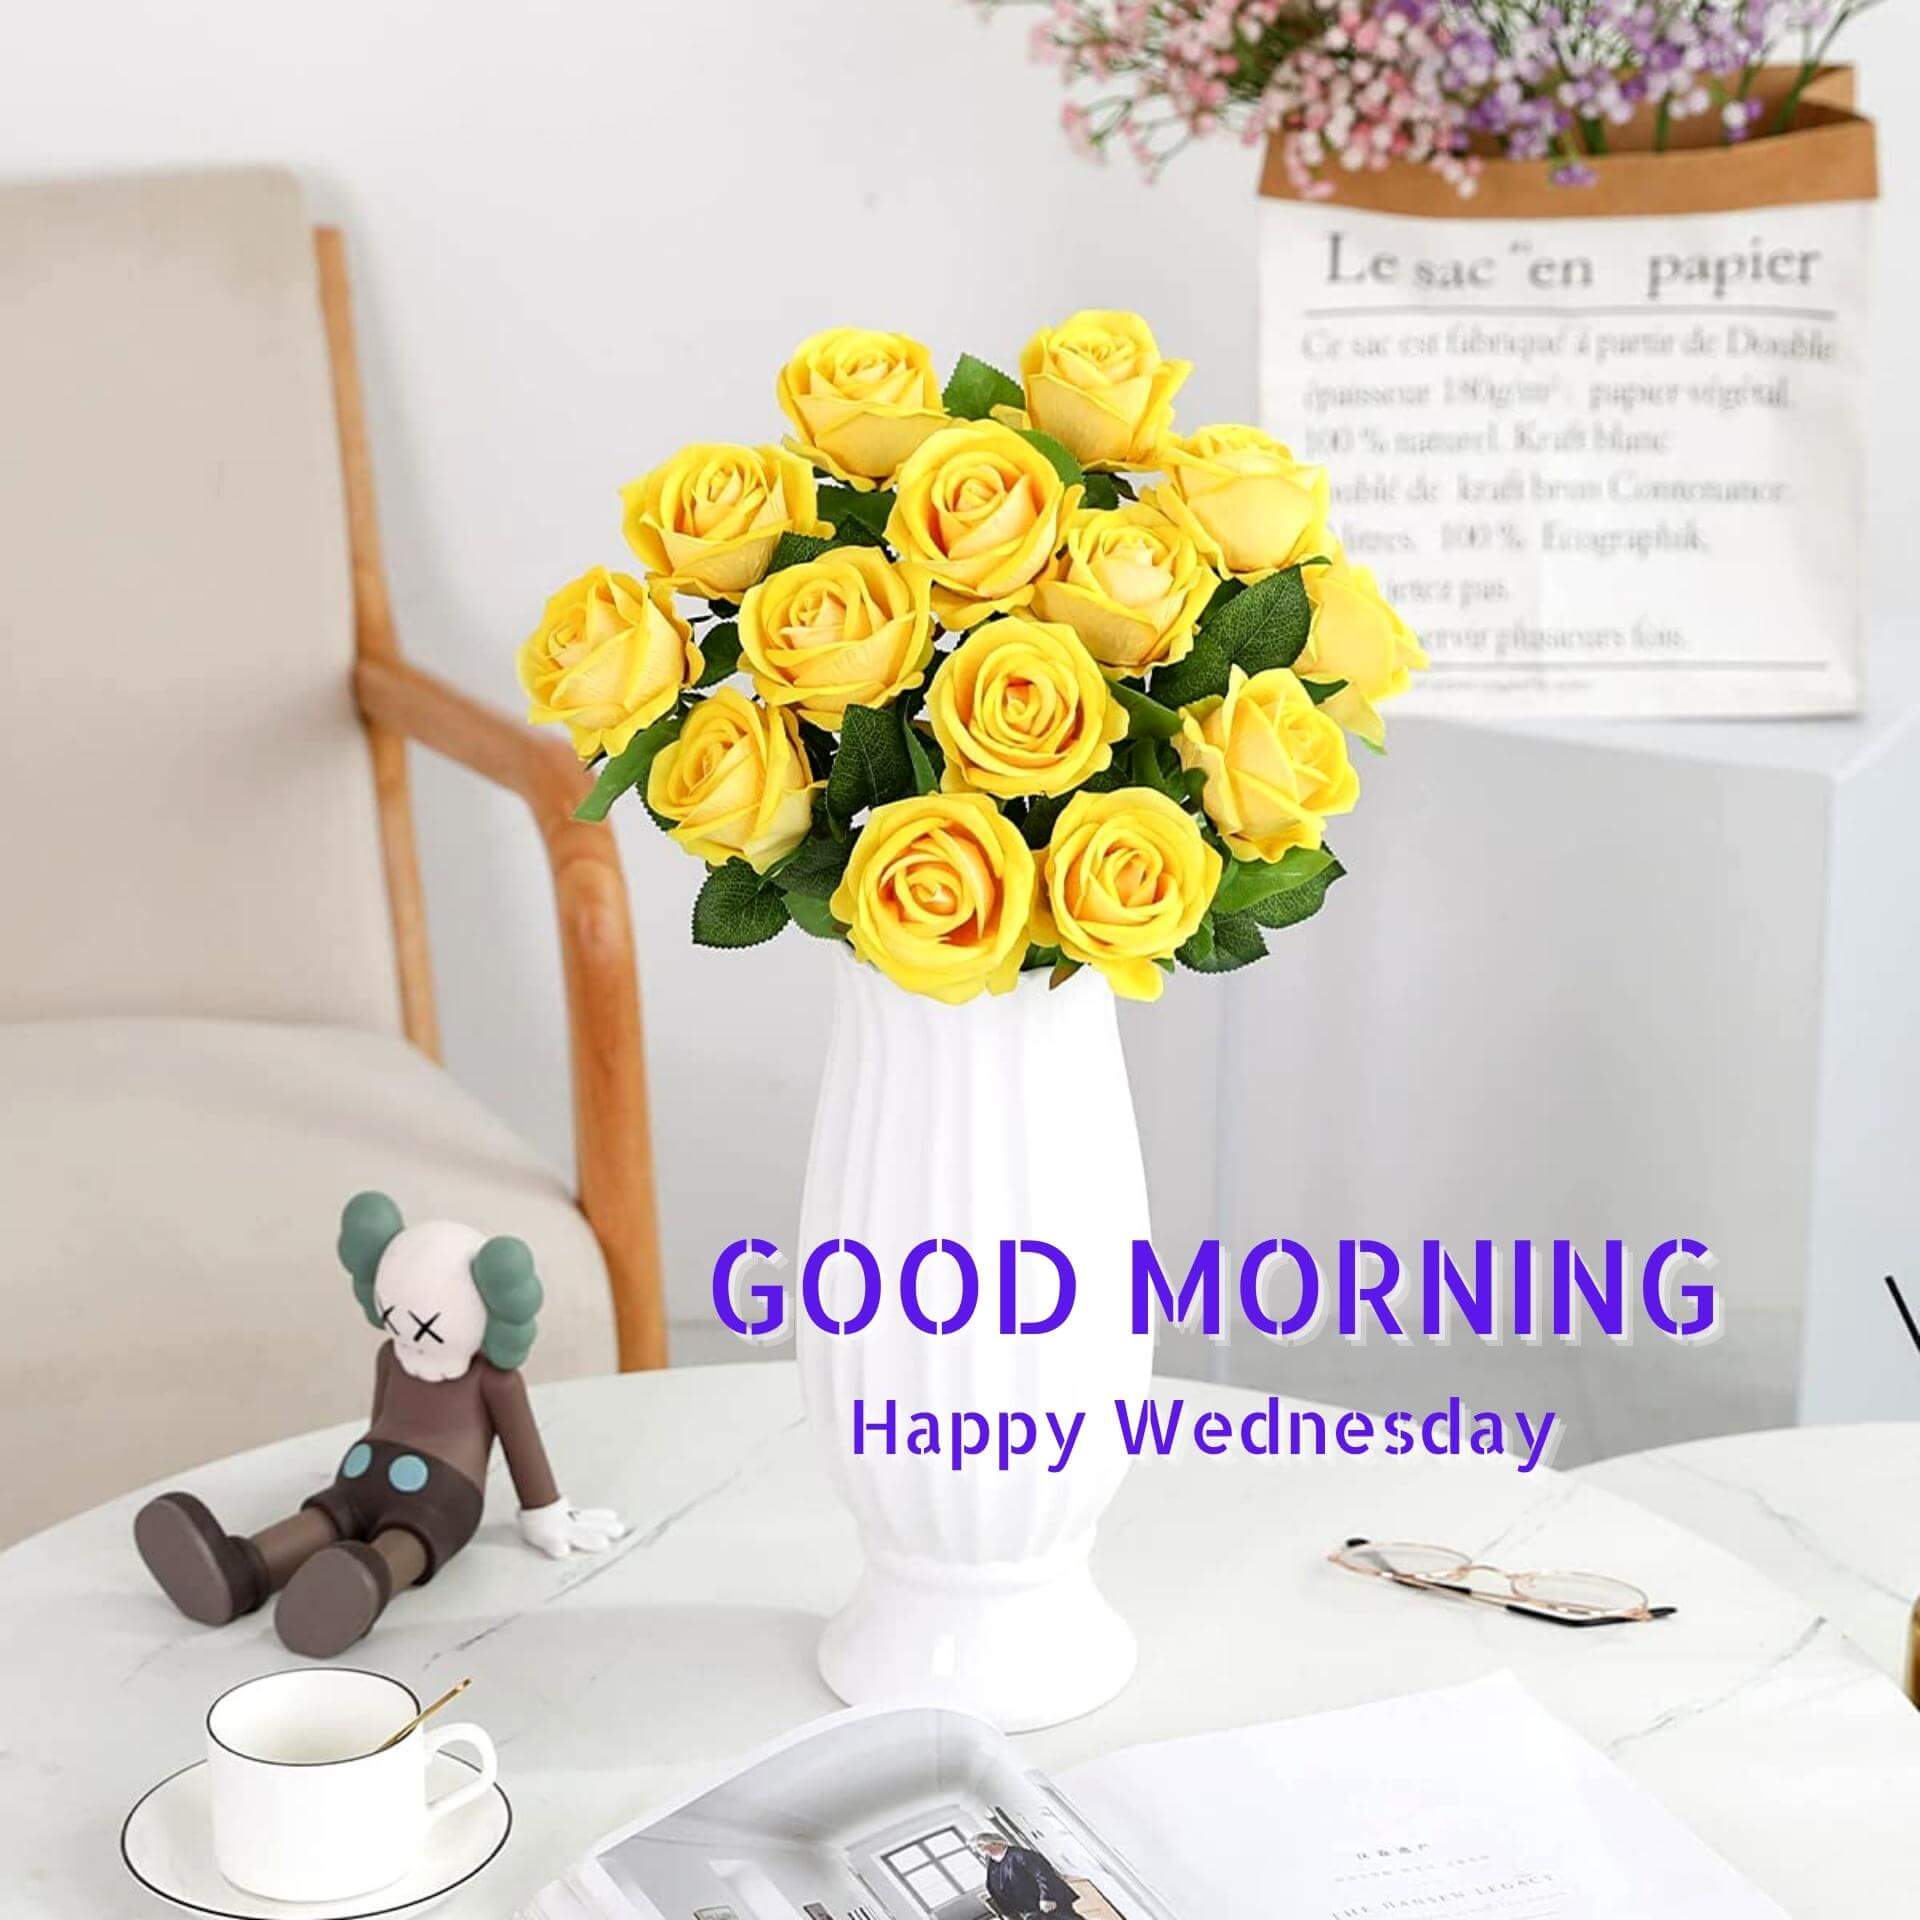 Wednesday good morning Wallpaper New Download